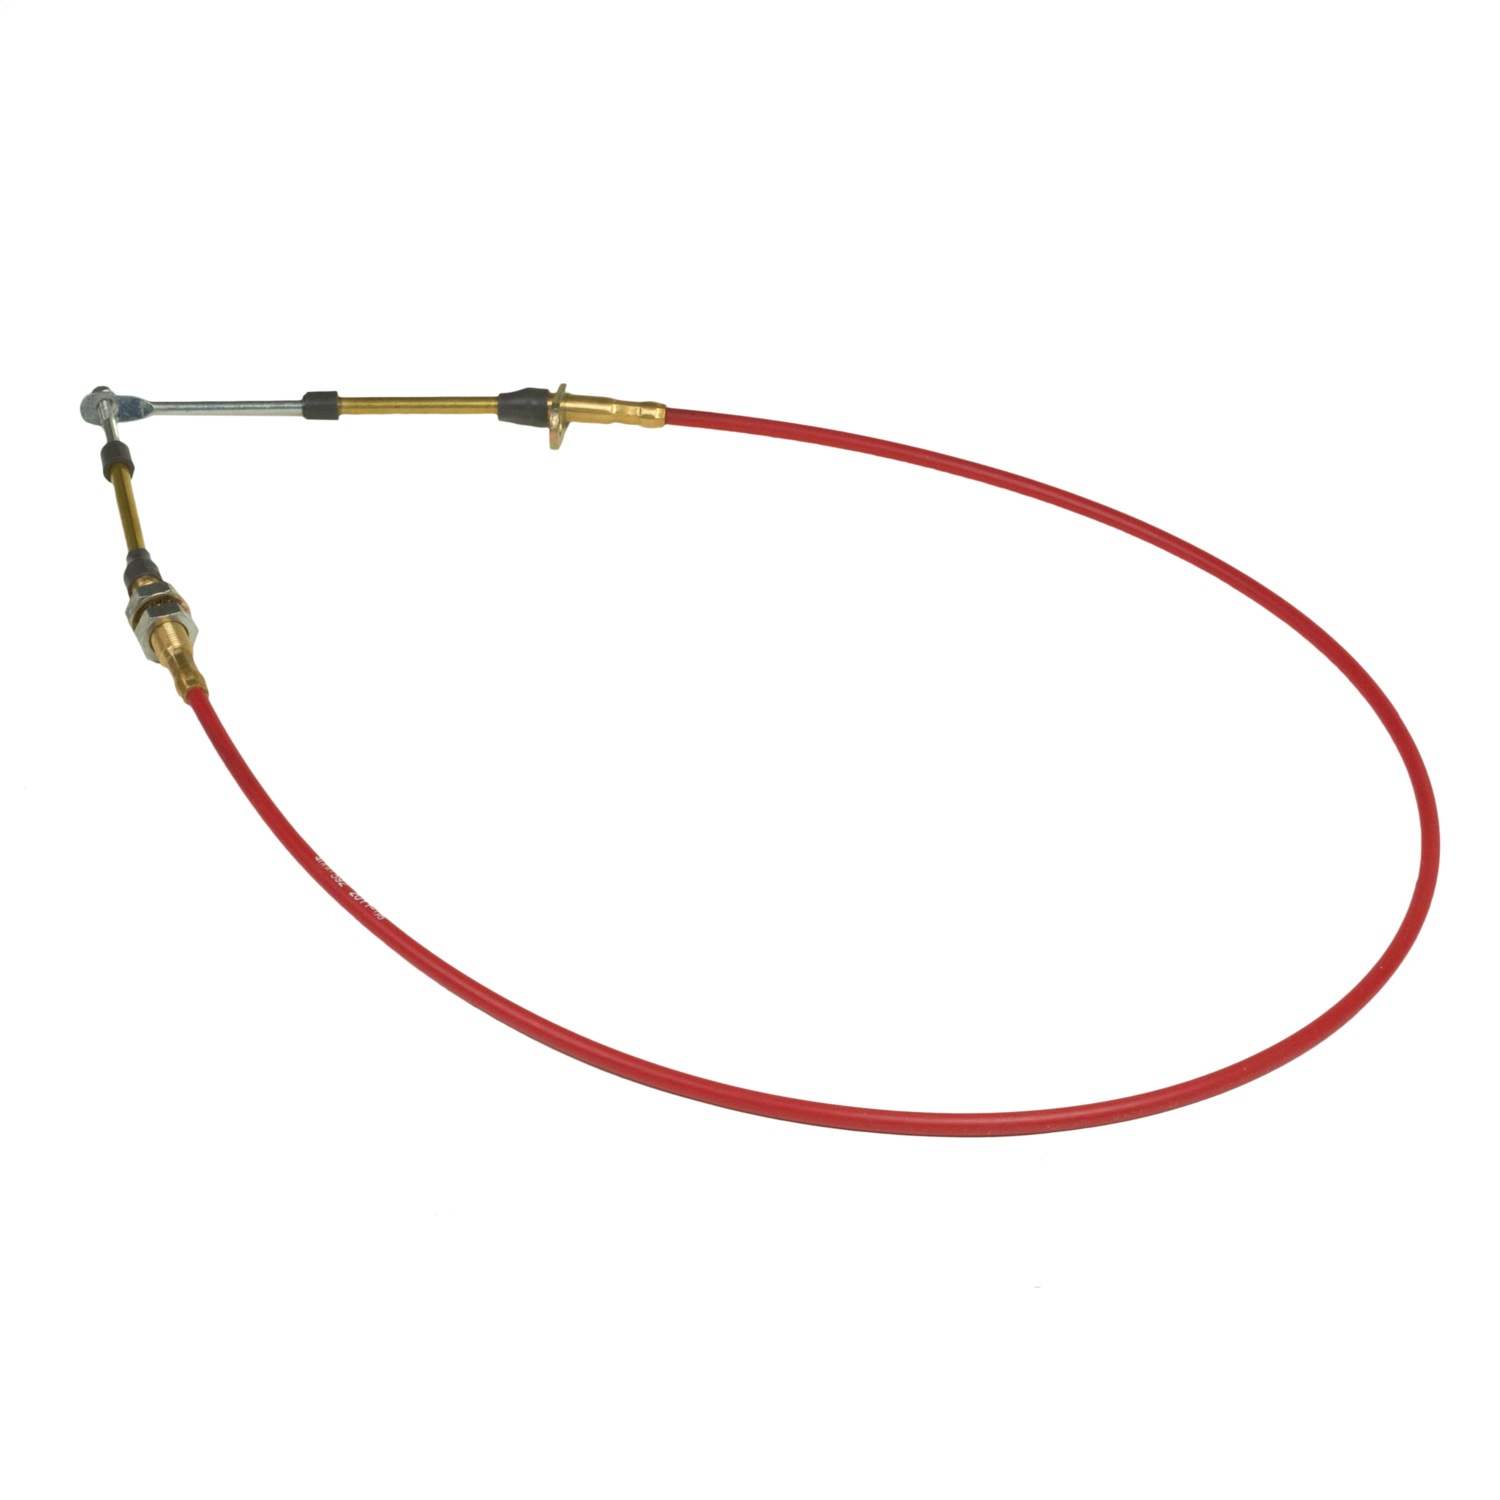 5' Eyelet Shifter Cable - 80605